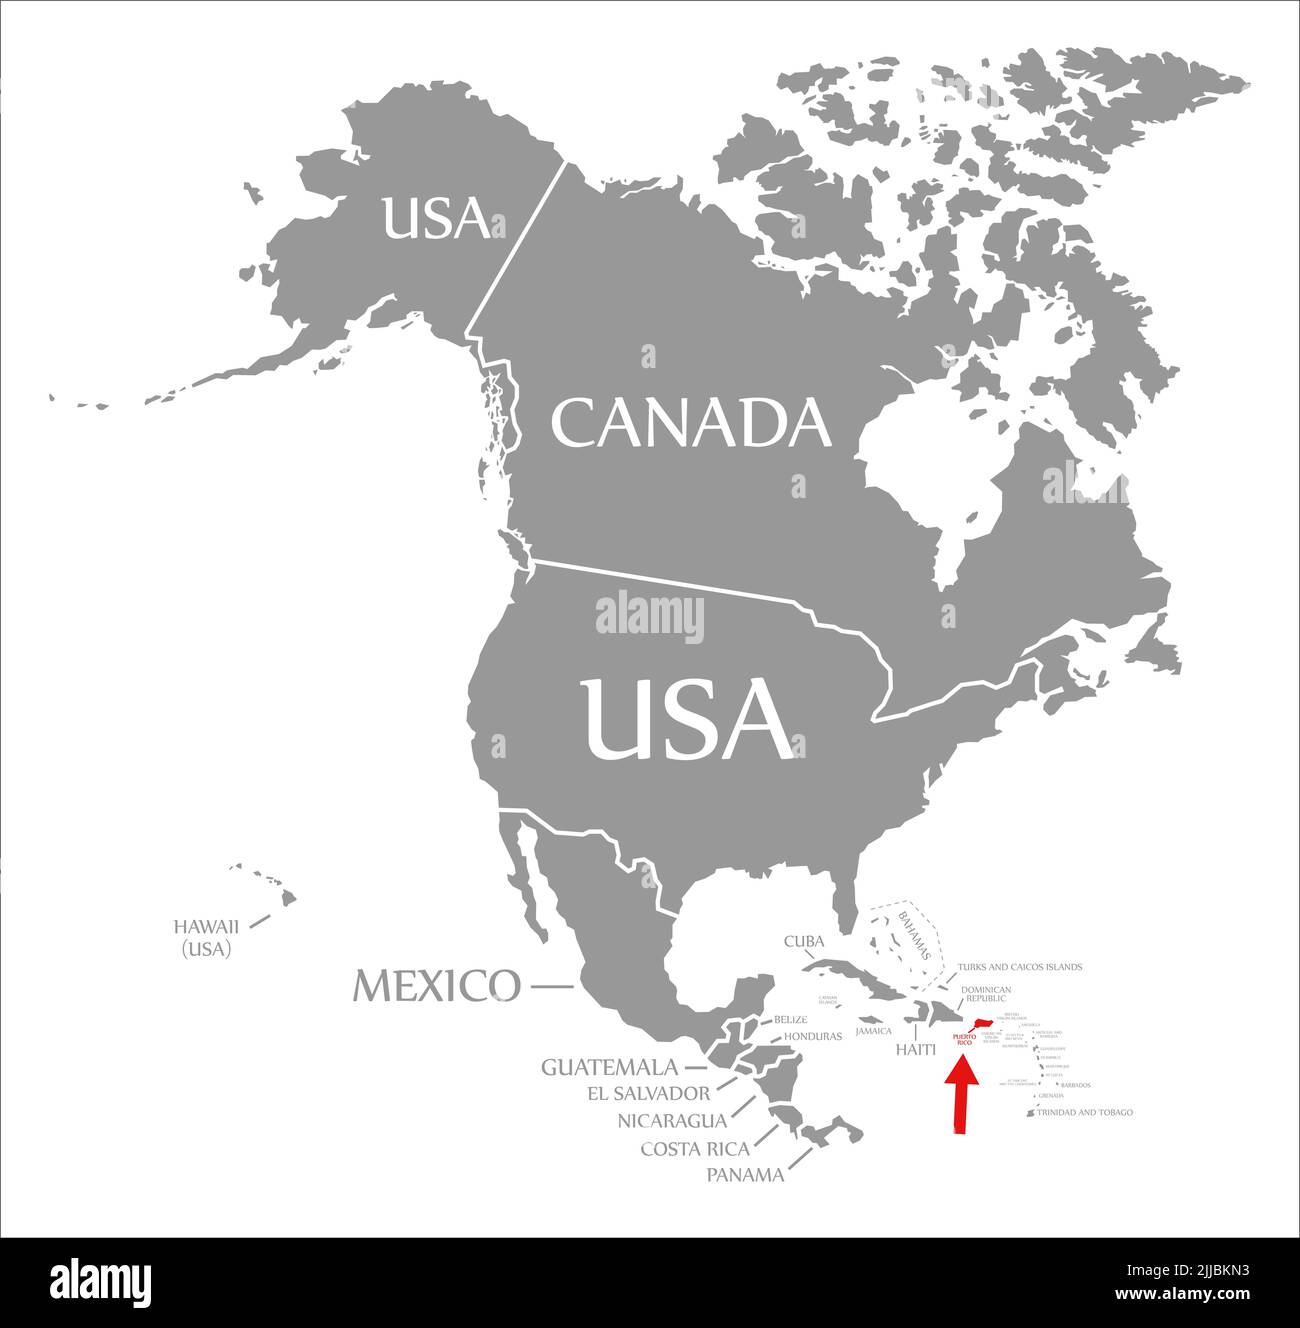 Puerto Rica red highlighted in map of North America Stock Photo